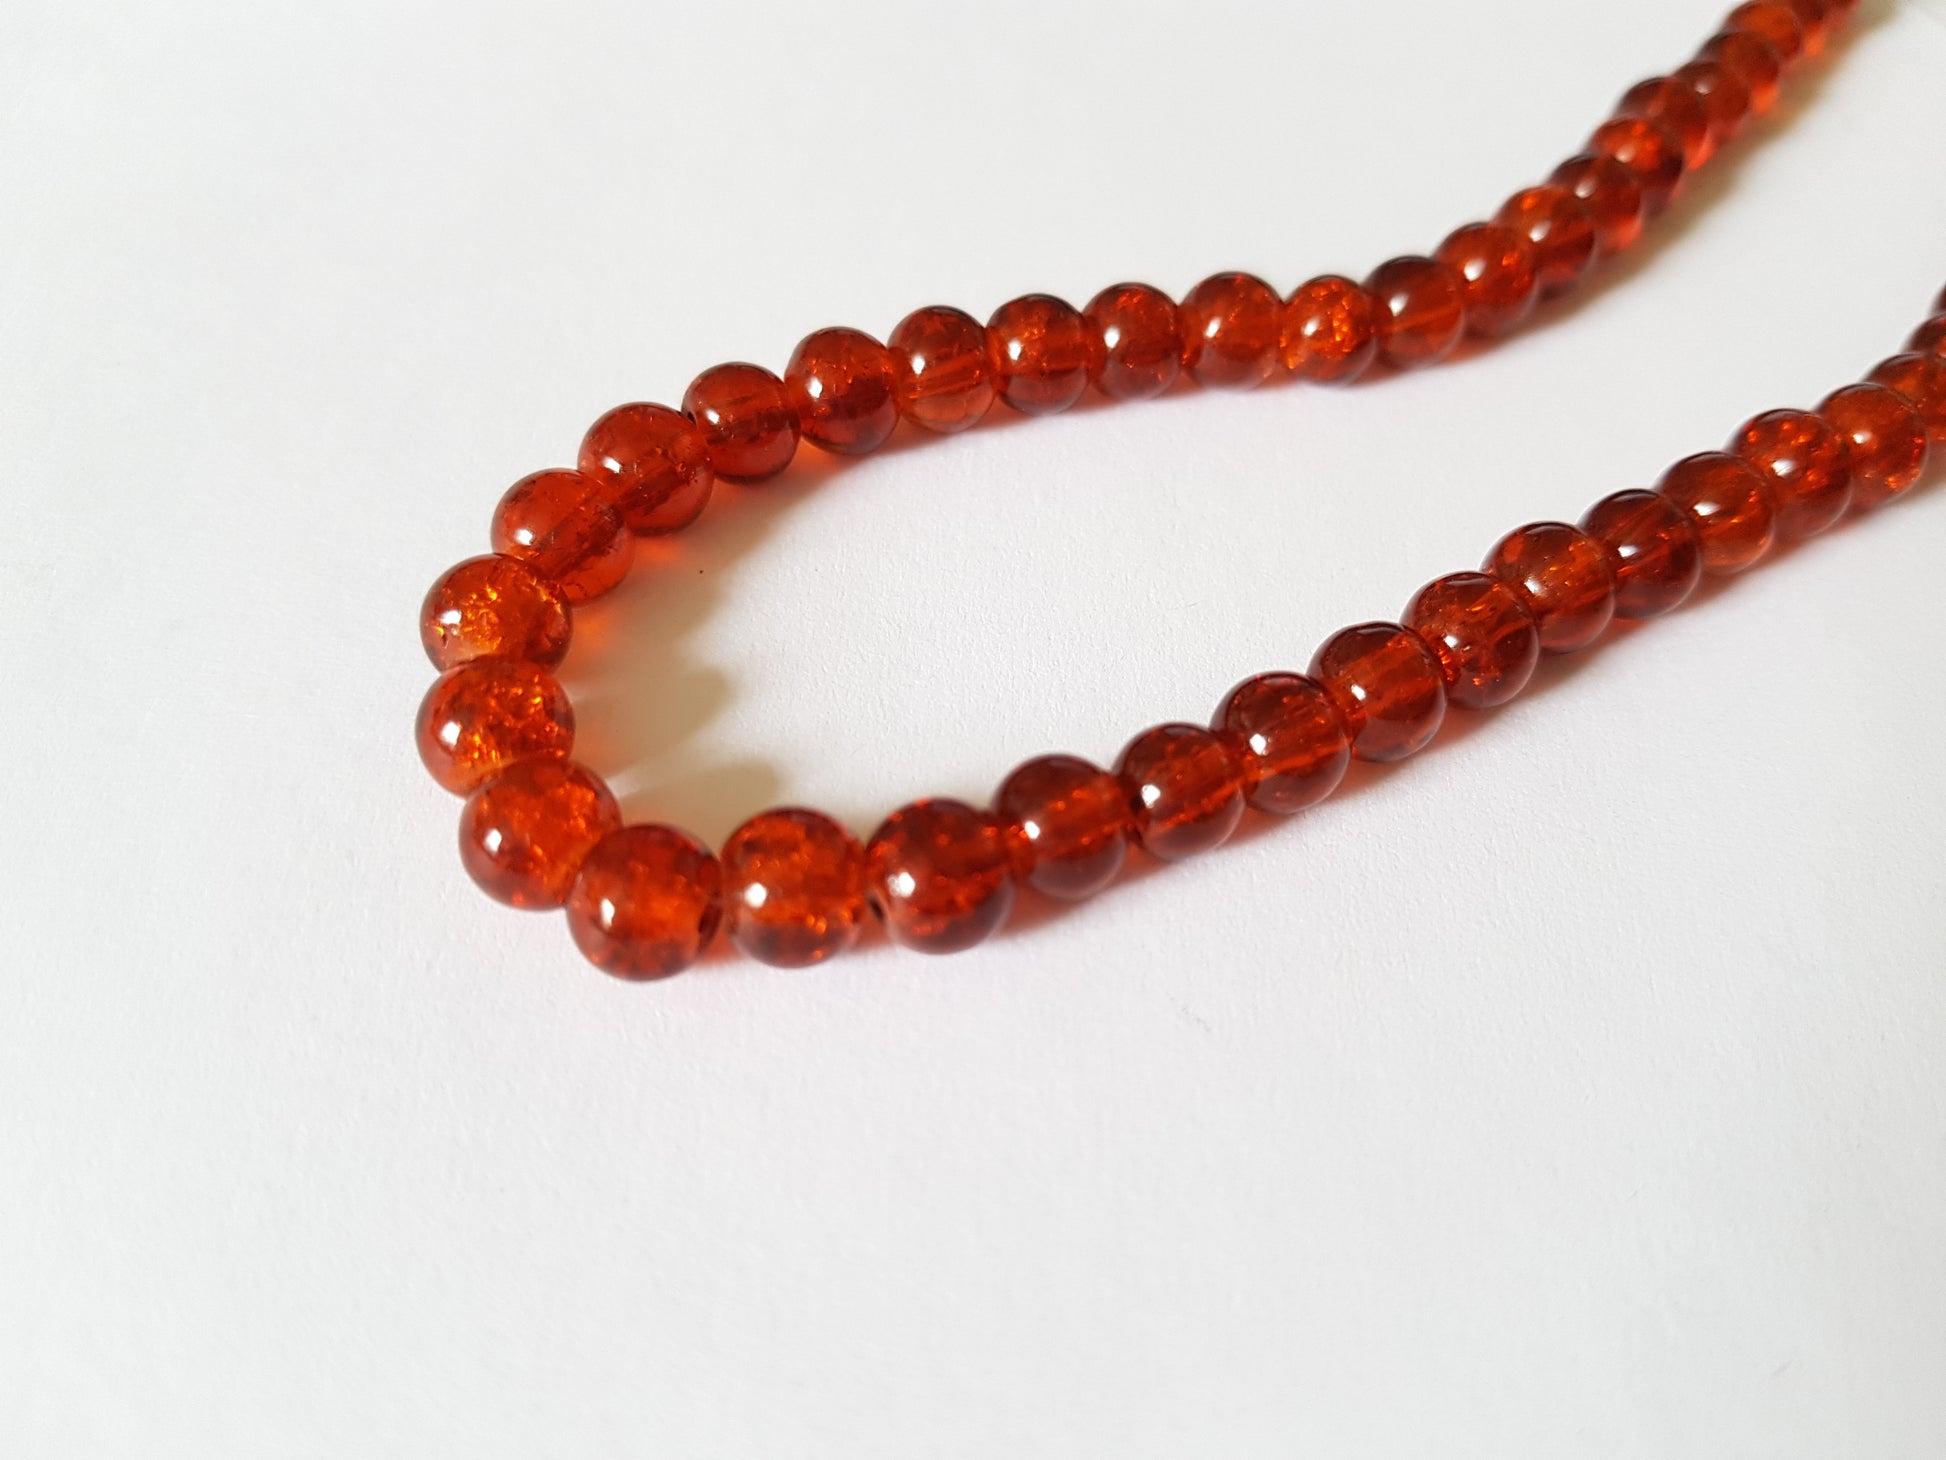 6mm crackle glass beads - amber 